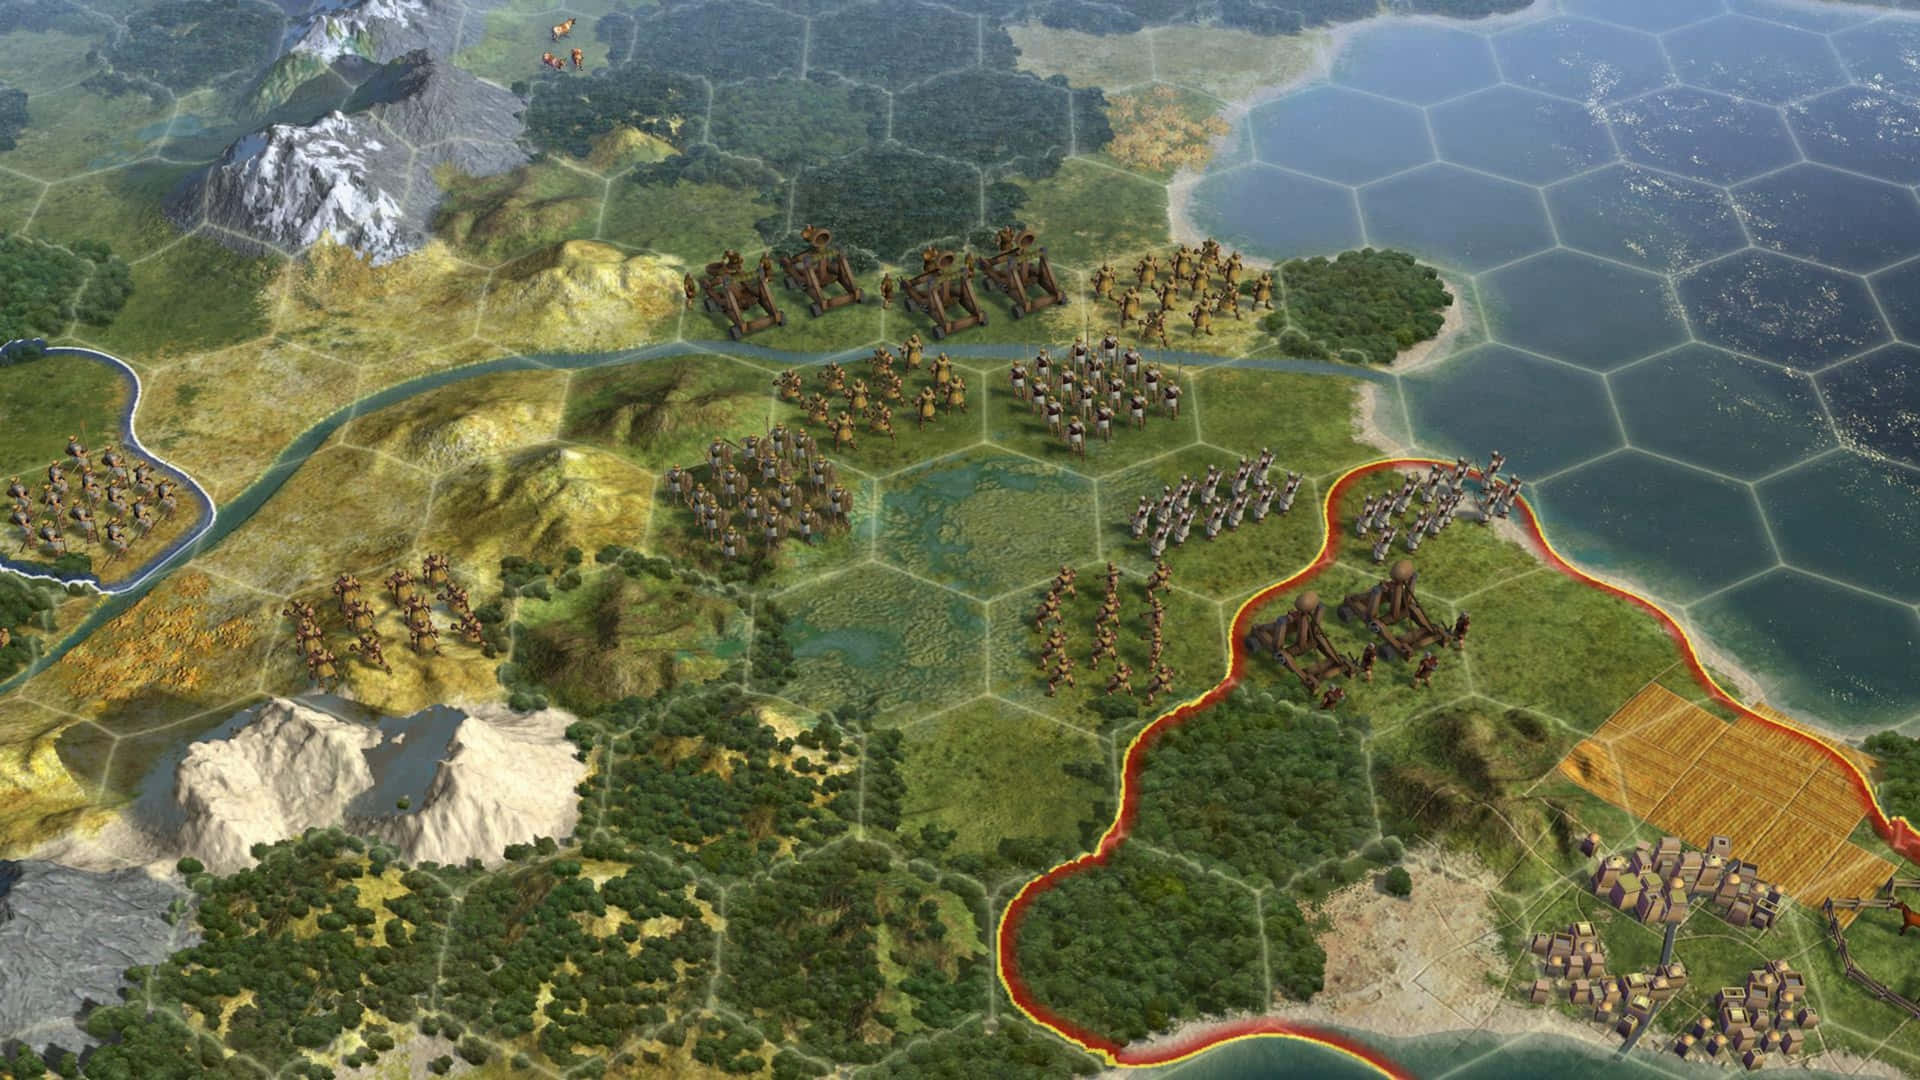 Enjoy the Expansive and Detailed World of Civilization V in 1440p